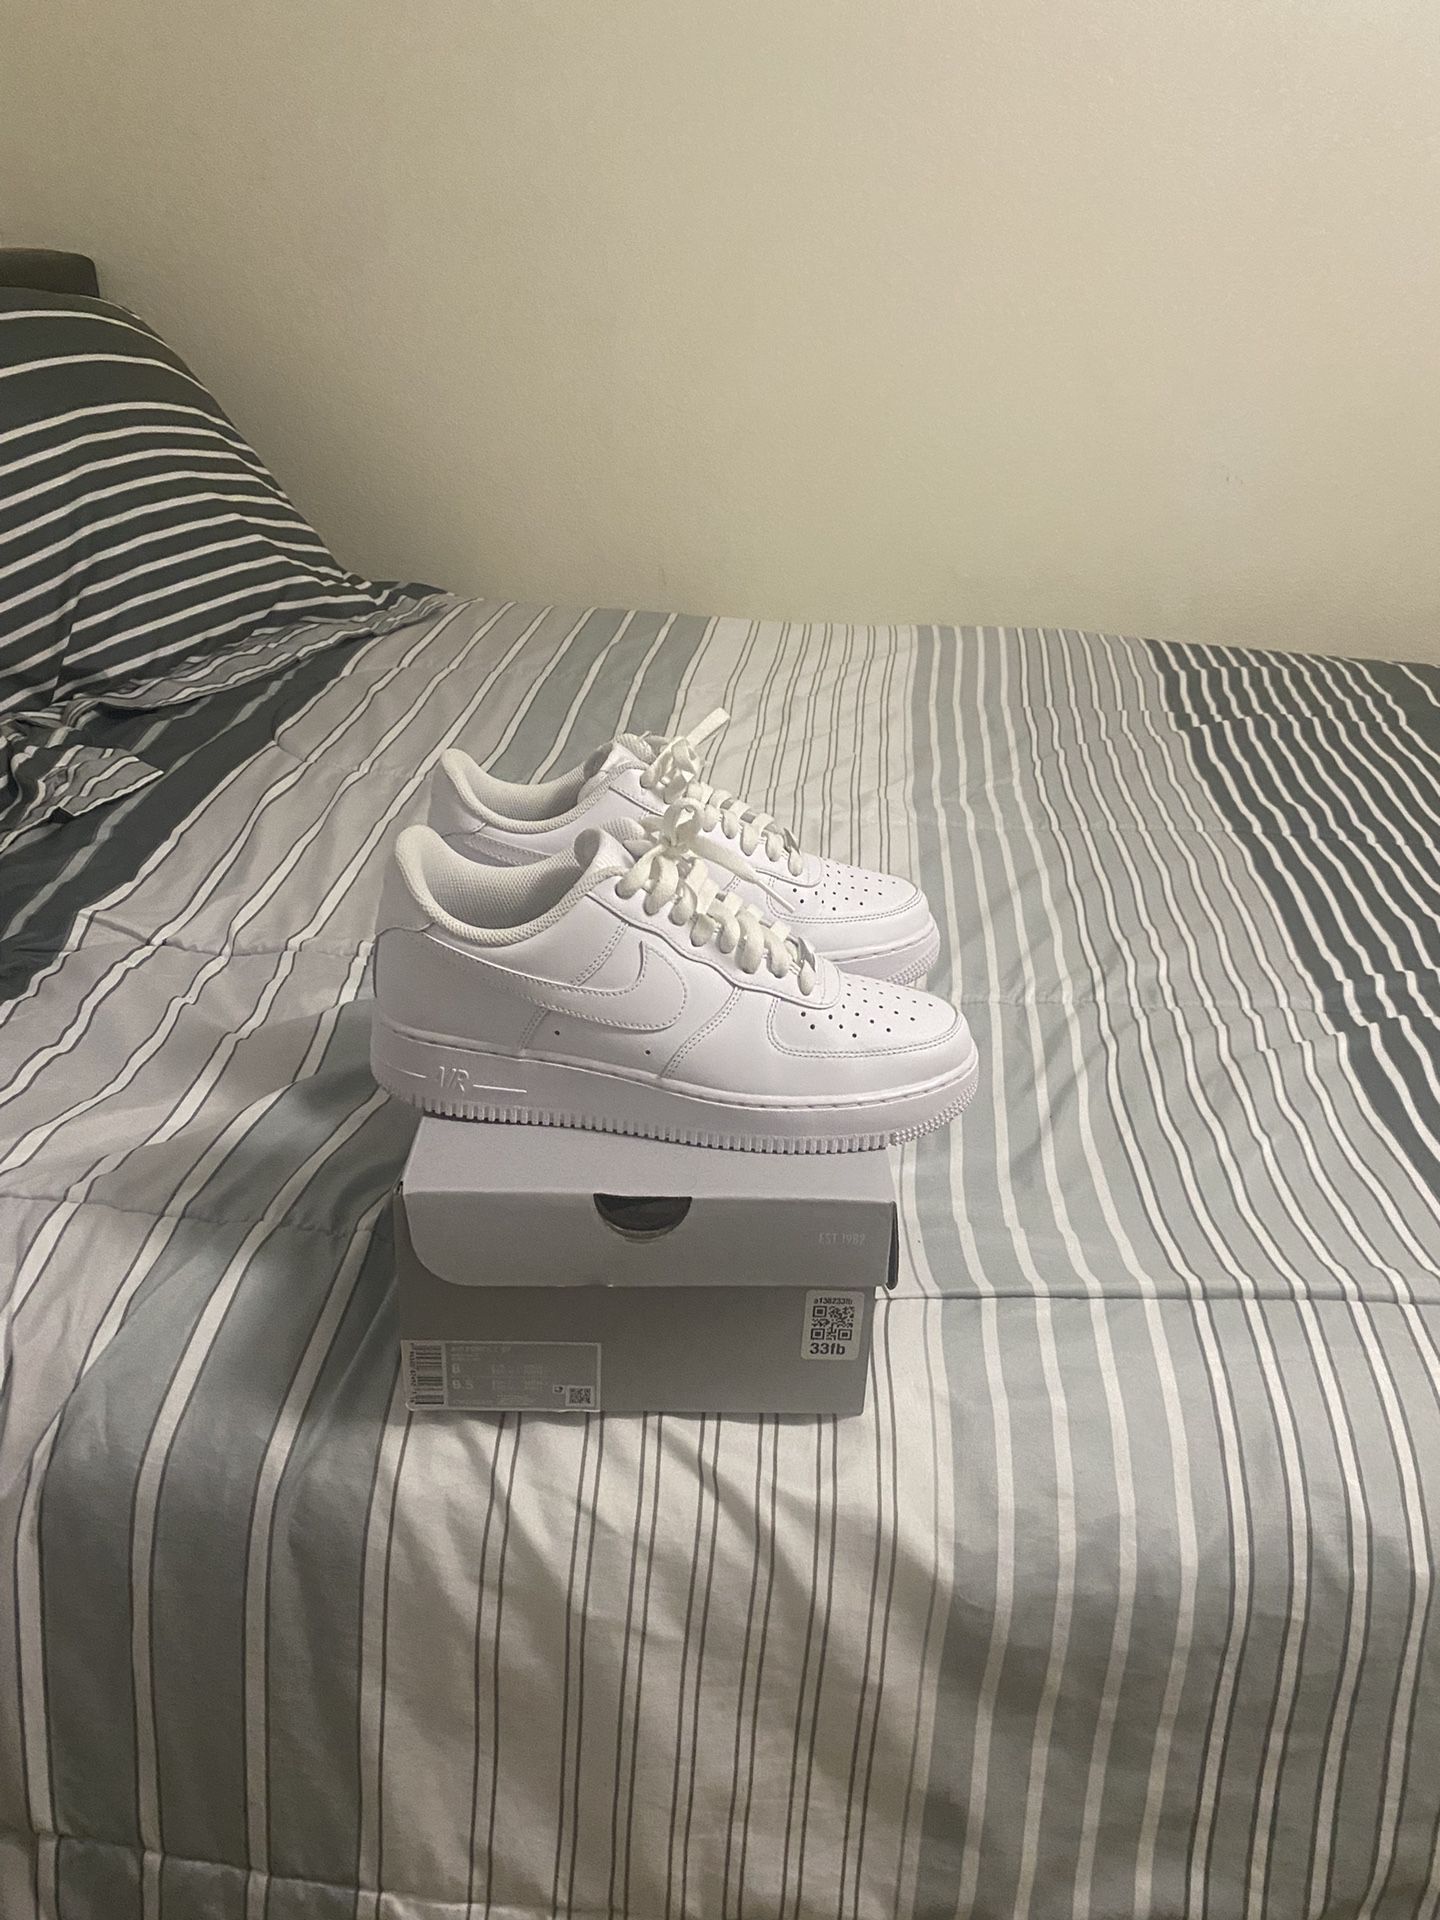 Nike Air Force 1s Size 8 (us)